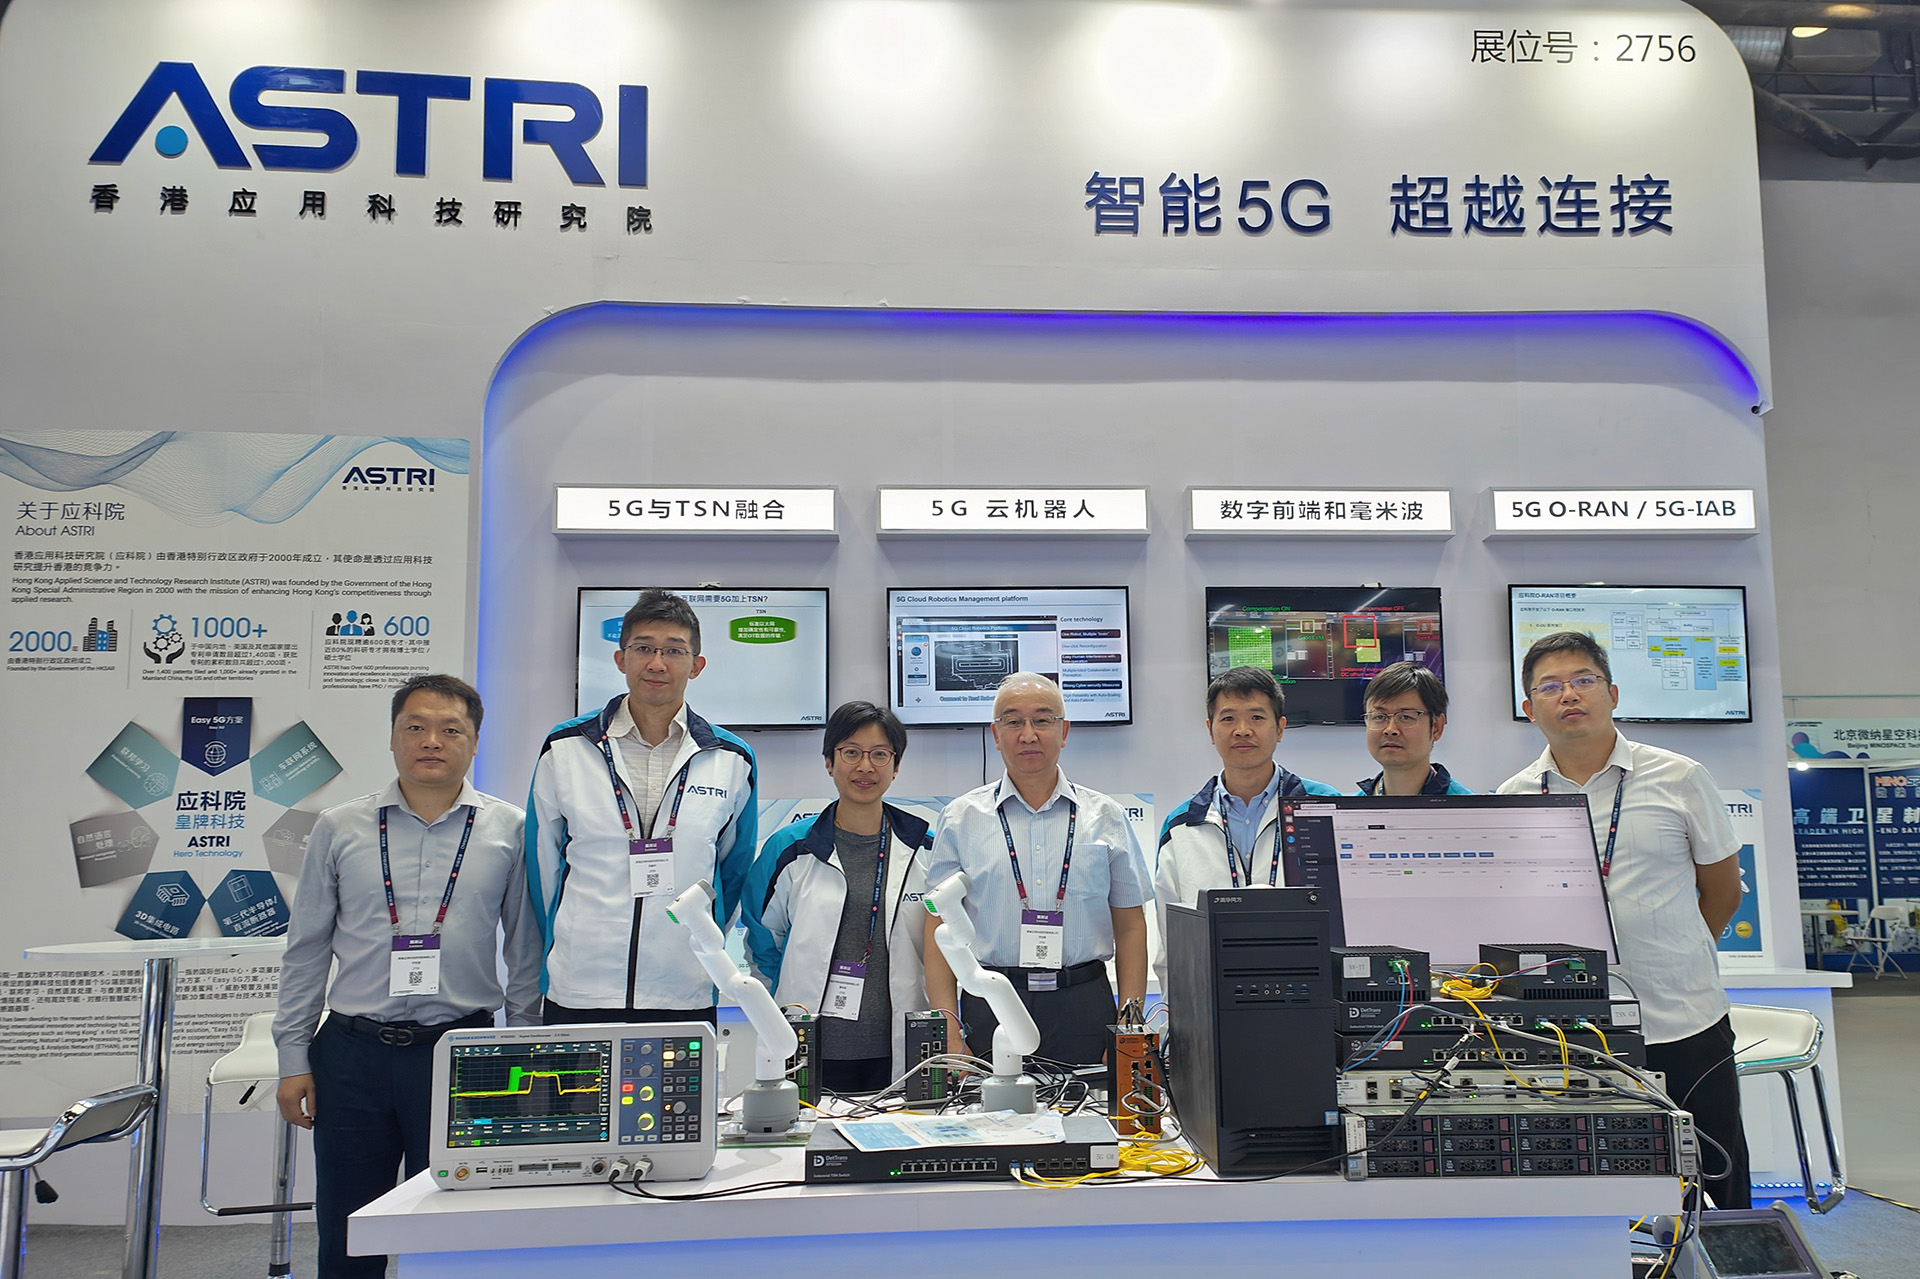 ASTRI-and-Ecosystem-Partners-Join-PT-Expo-China-and-MWC-Shanghai-Showcase-the-Award-Winning-5G-Technologies-p1